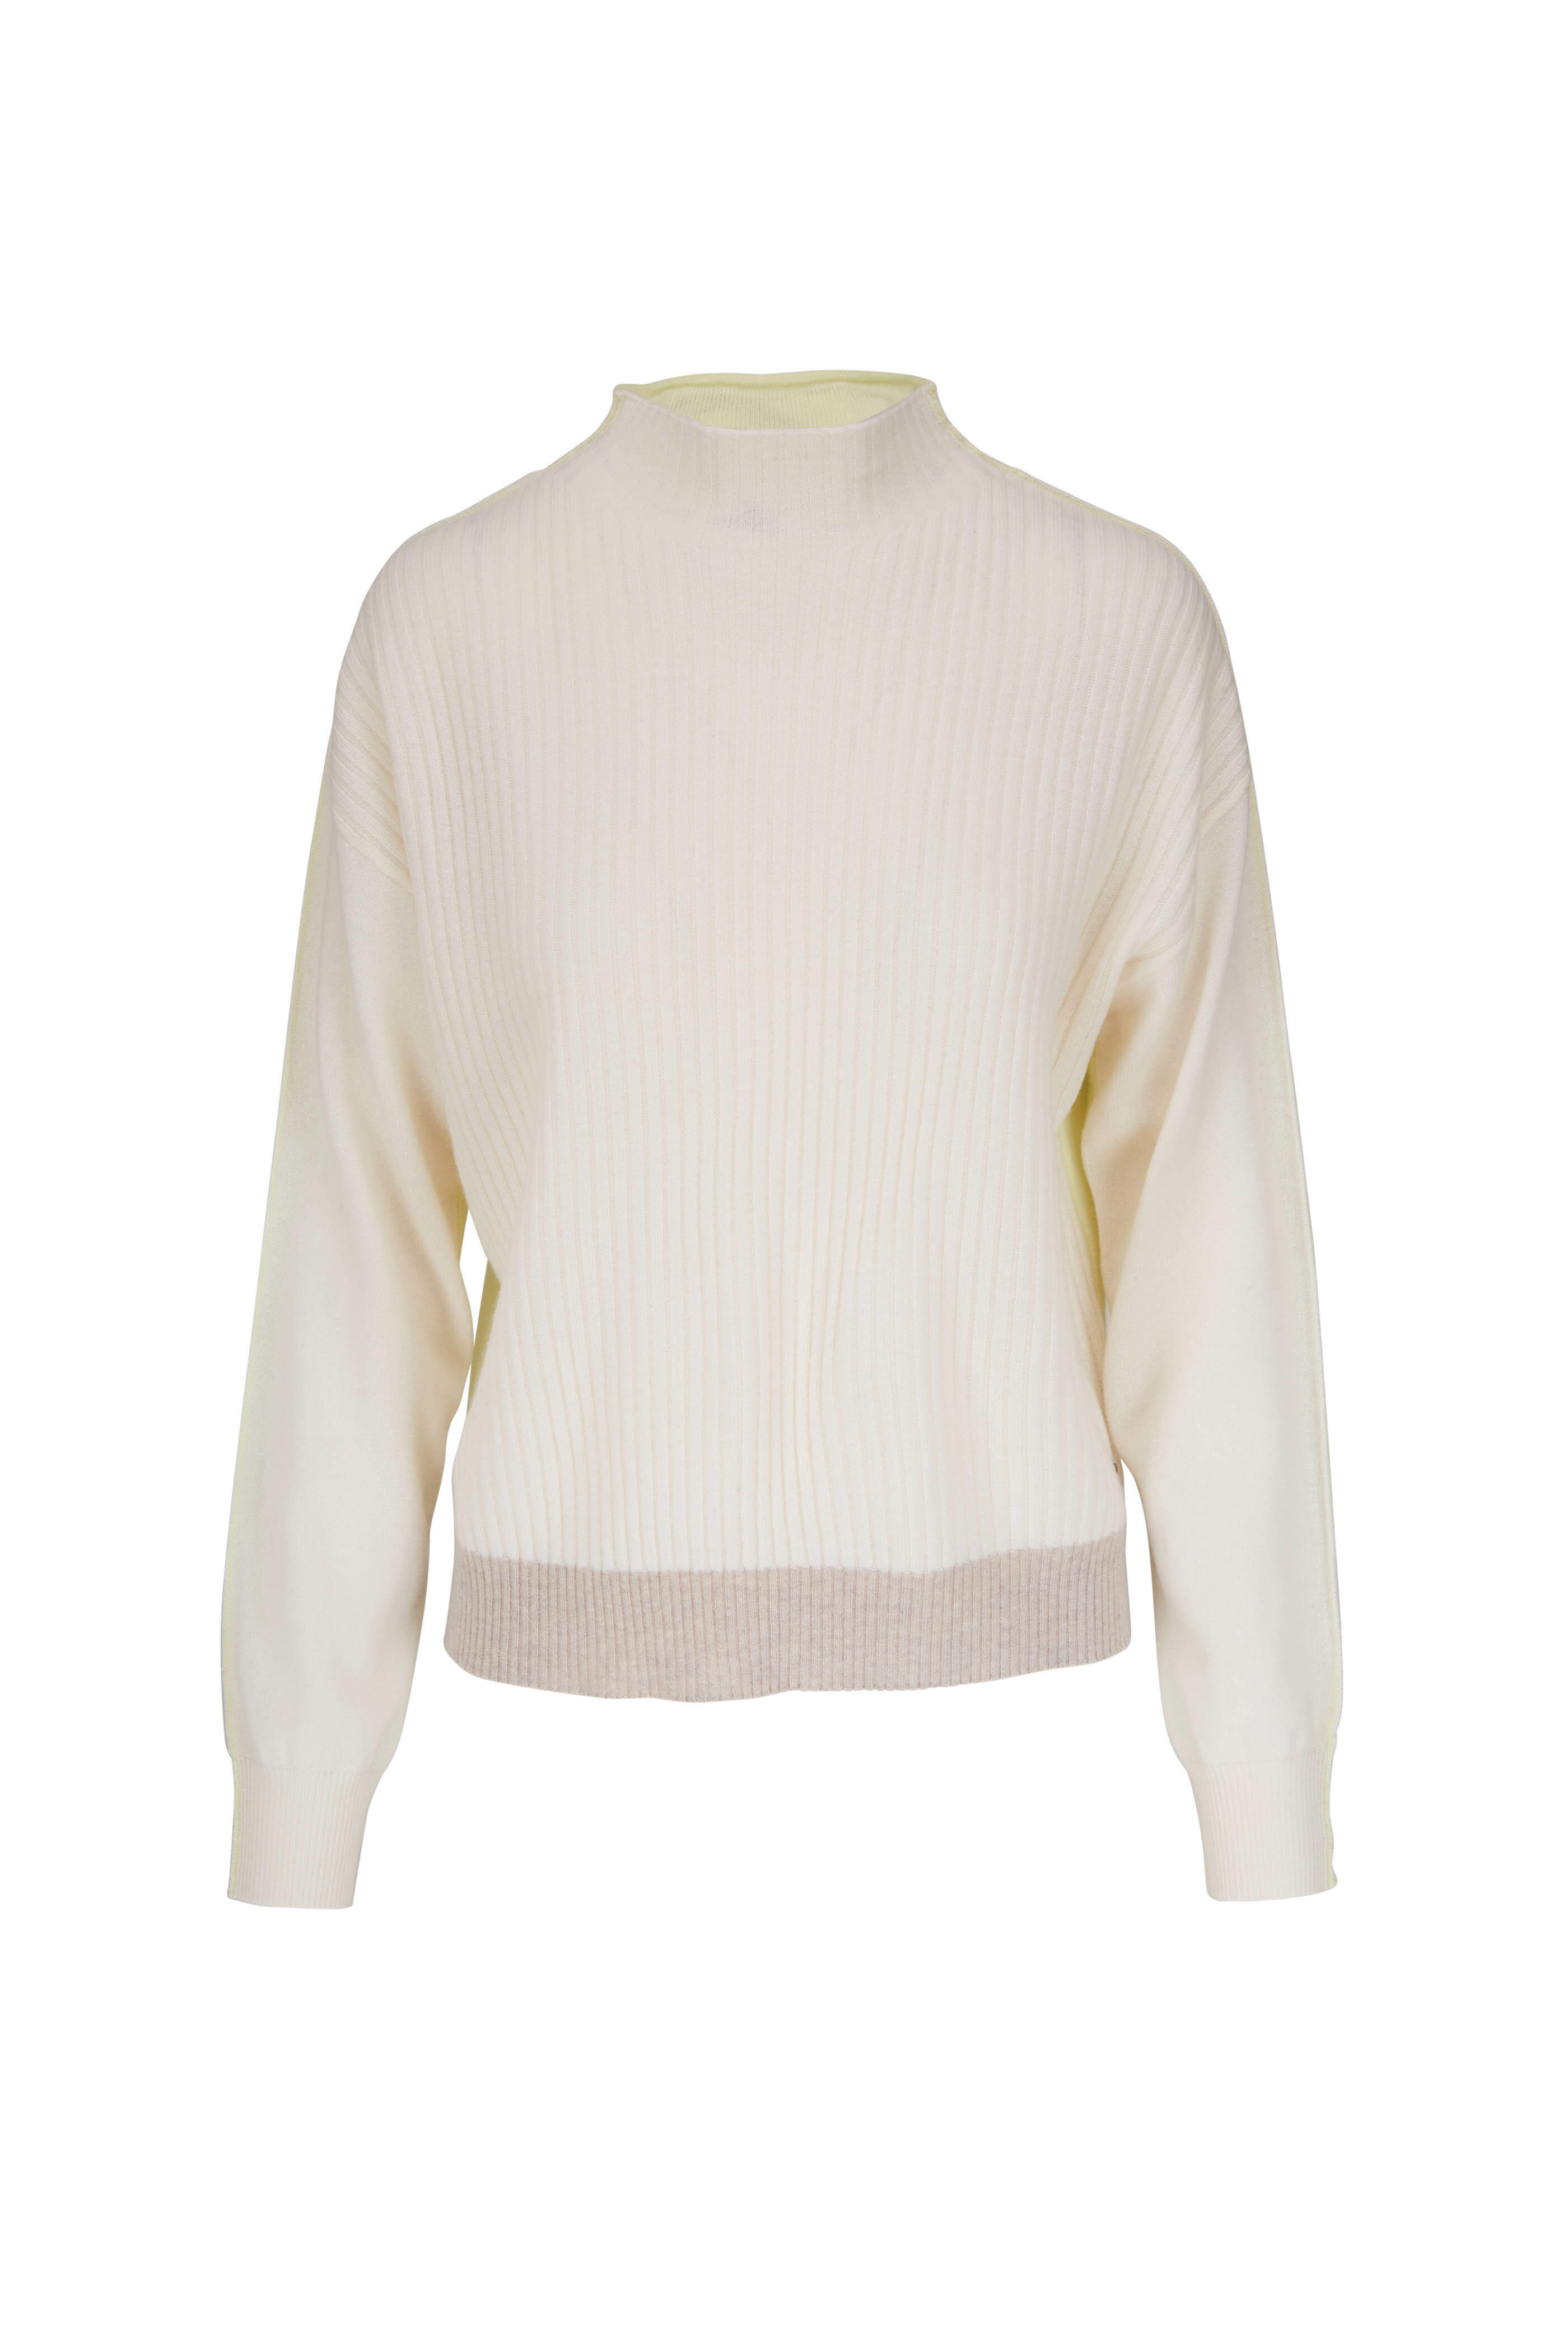 Bogner - Camie White & Lime Ribbed Sweater | Mitchell Stores